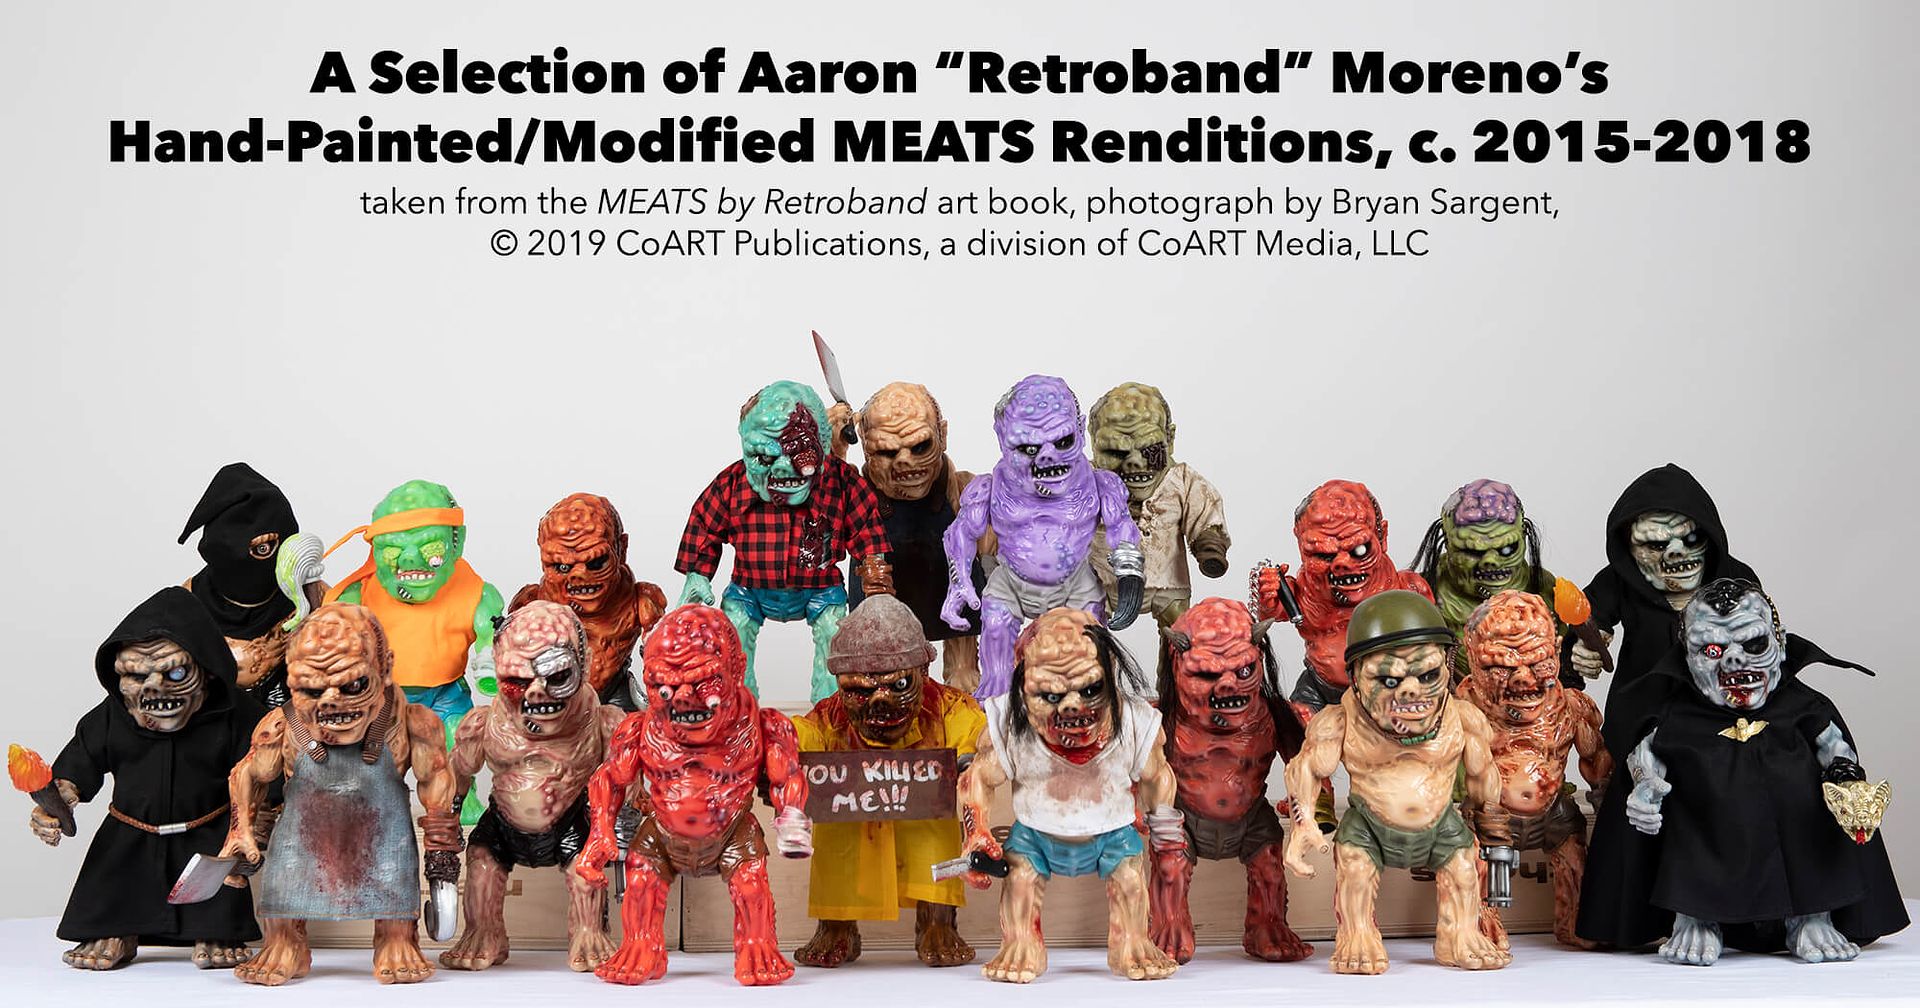 Retroband, SpankyStokes, Limited Edition, Book, New York, Bottleneck Gallery, CoART Magazine, Soft Vinyl, Vinyl Toys, Designer Toy (Art Toy), Retroband's "I can't stop the Monster I created" solo exhibition and new BOOK details